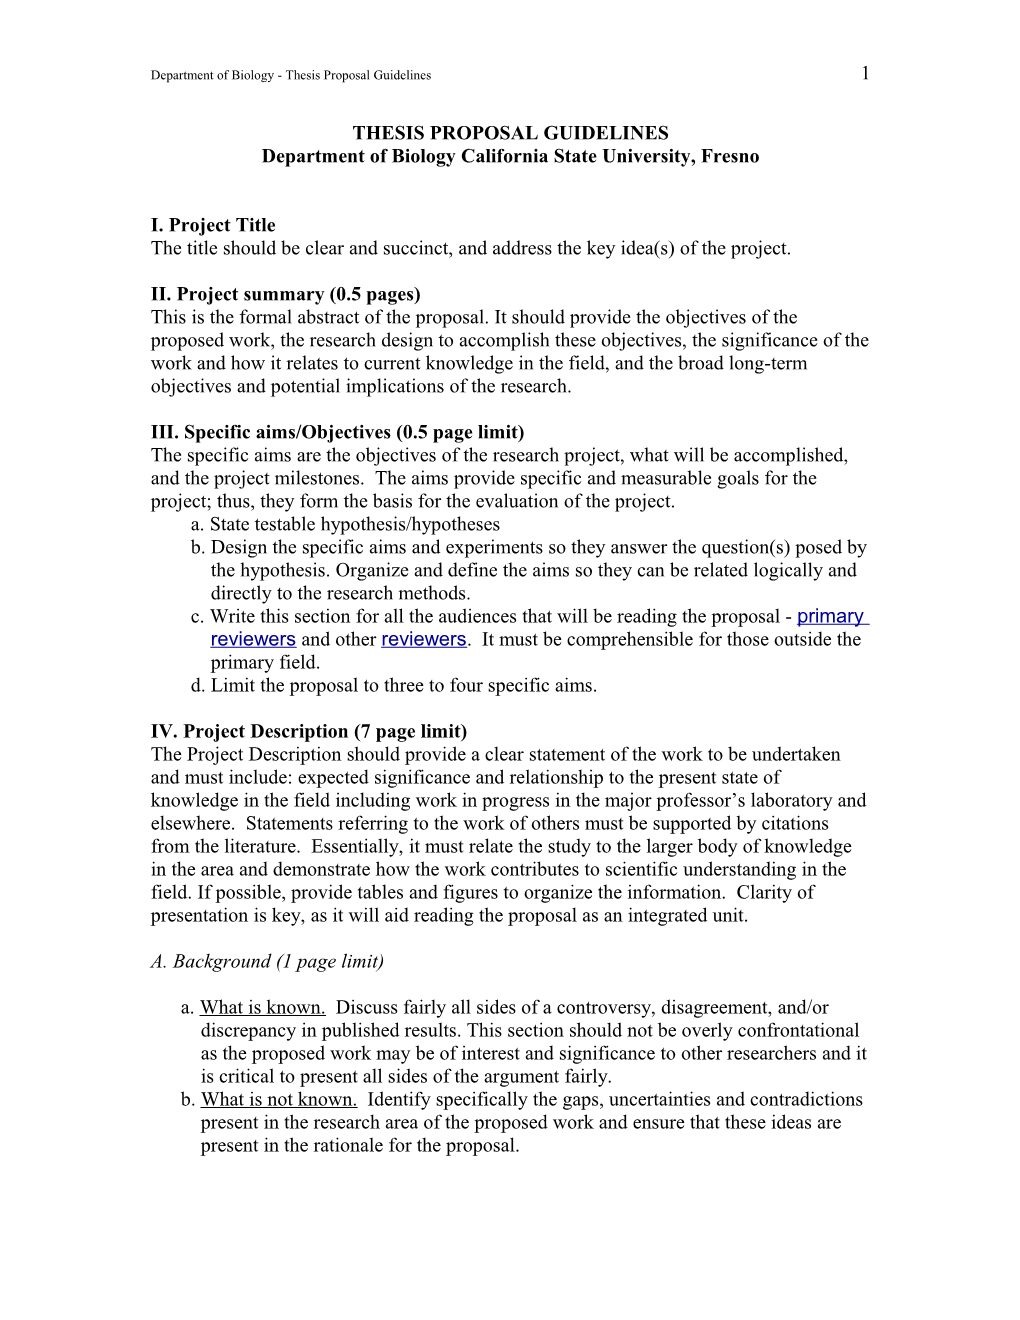 Department of Biology - Thesis Proposal Guidelines1